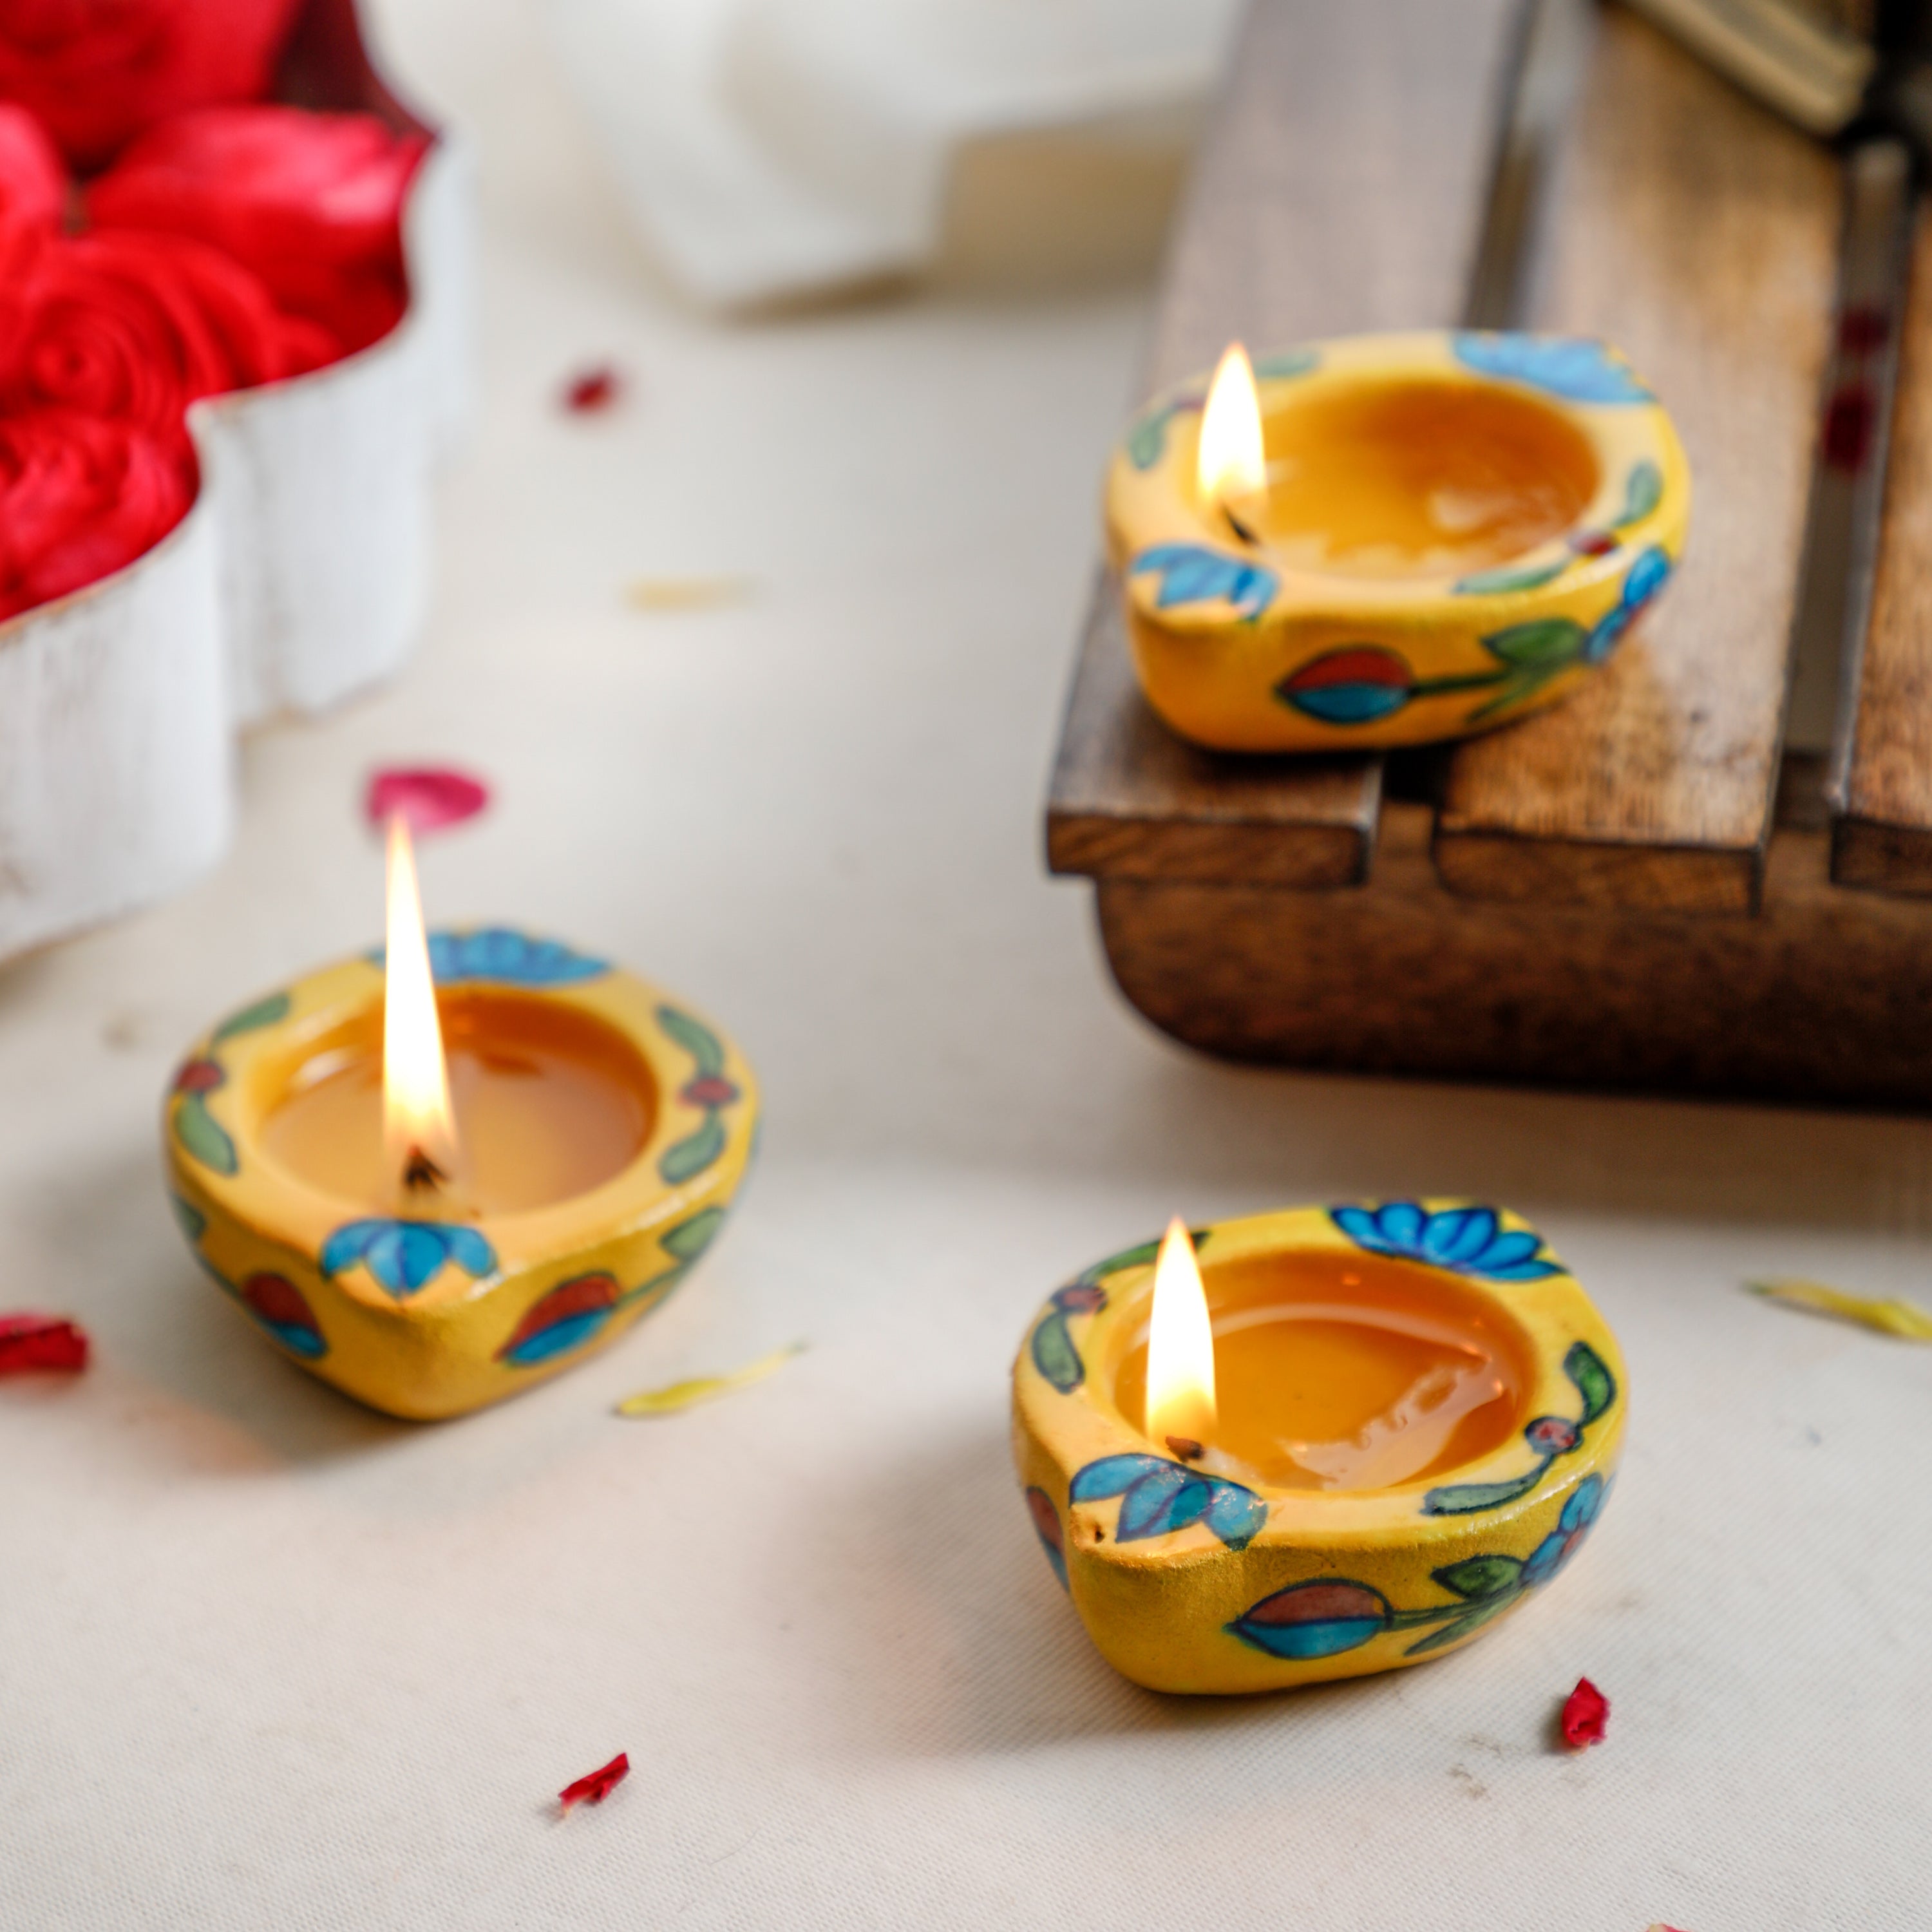 levate your festive décor with our hand-painted blue pottery diyas